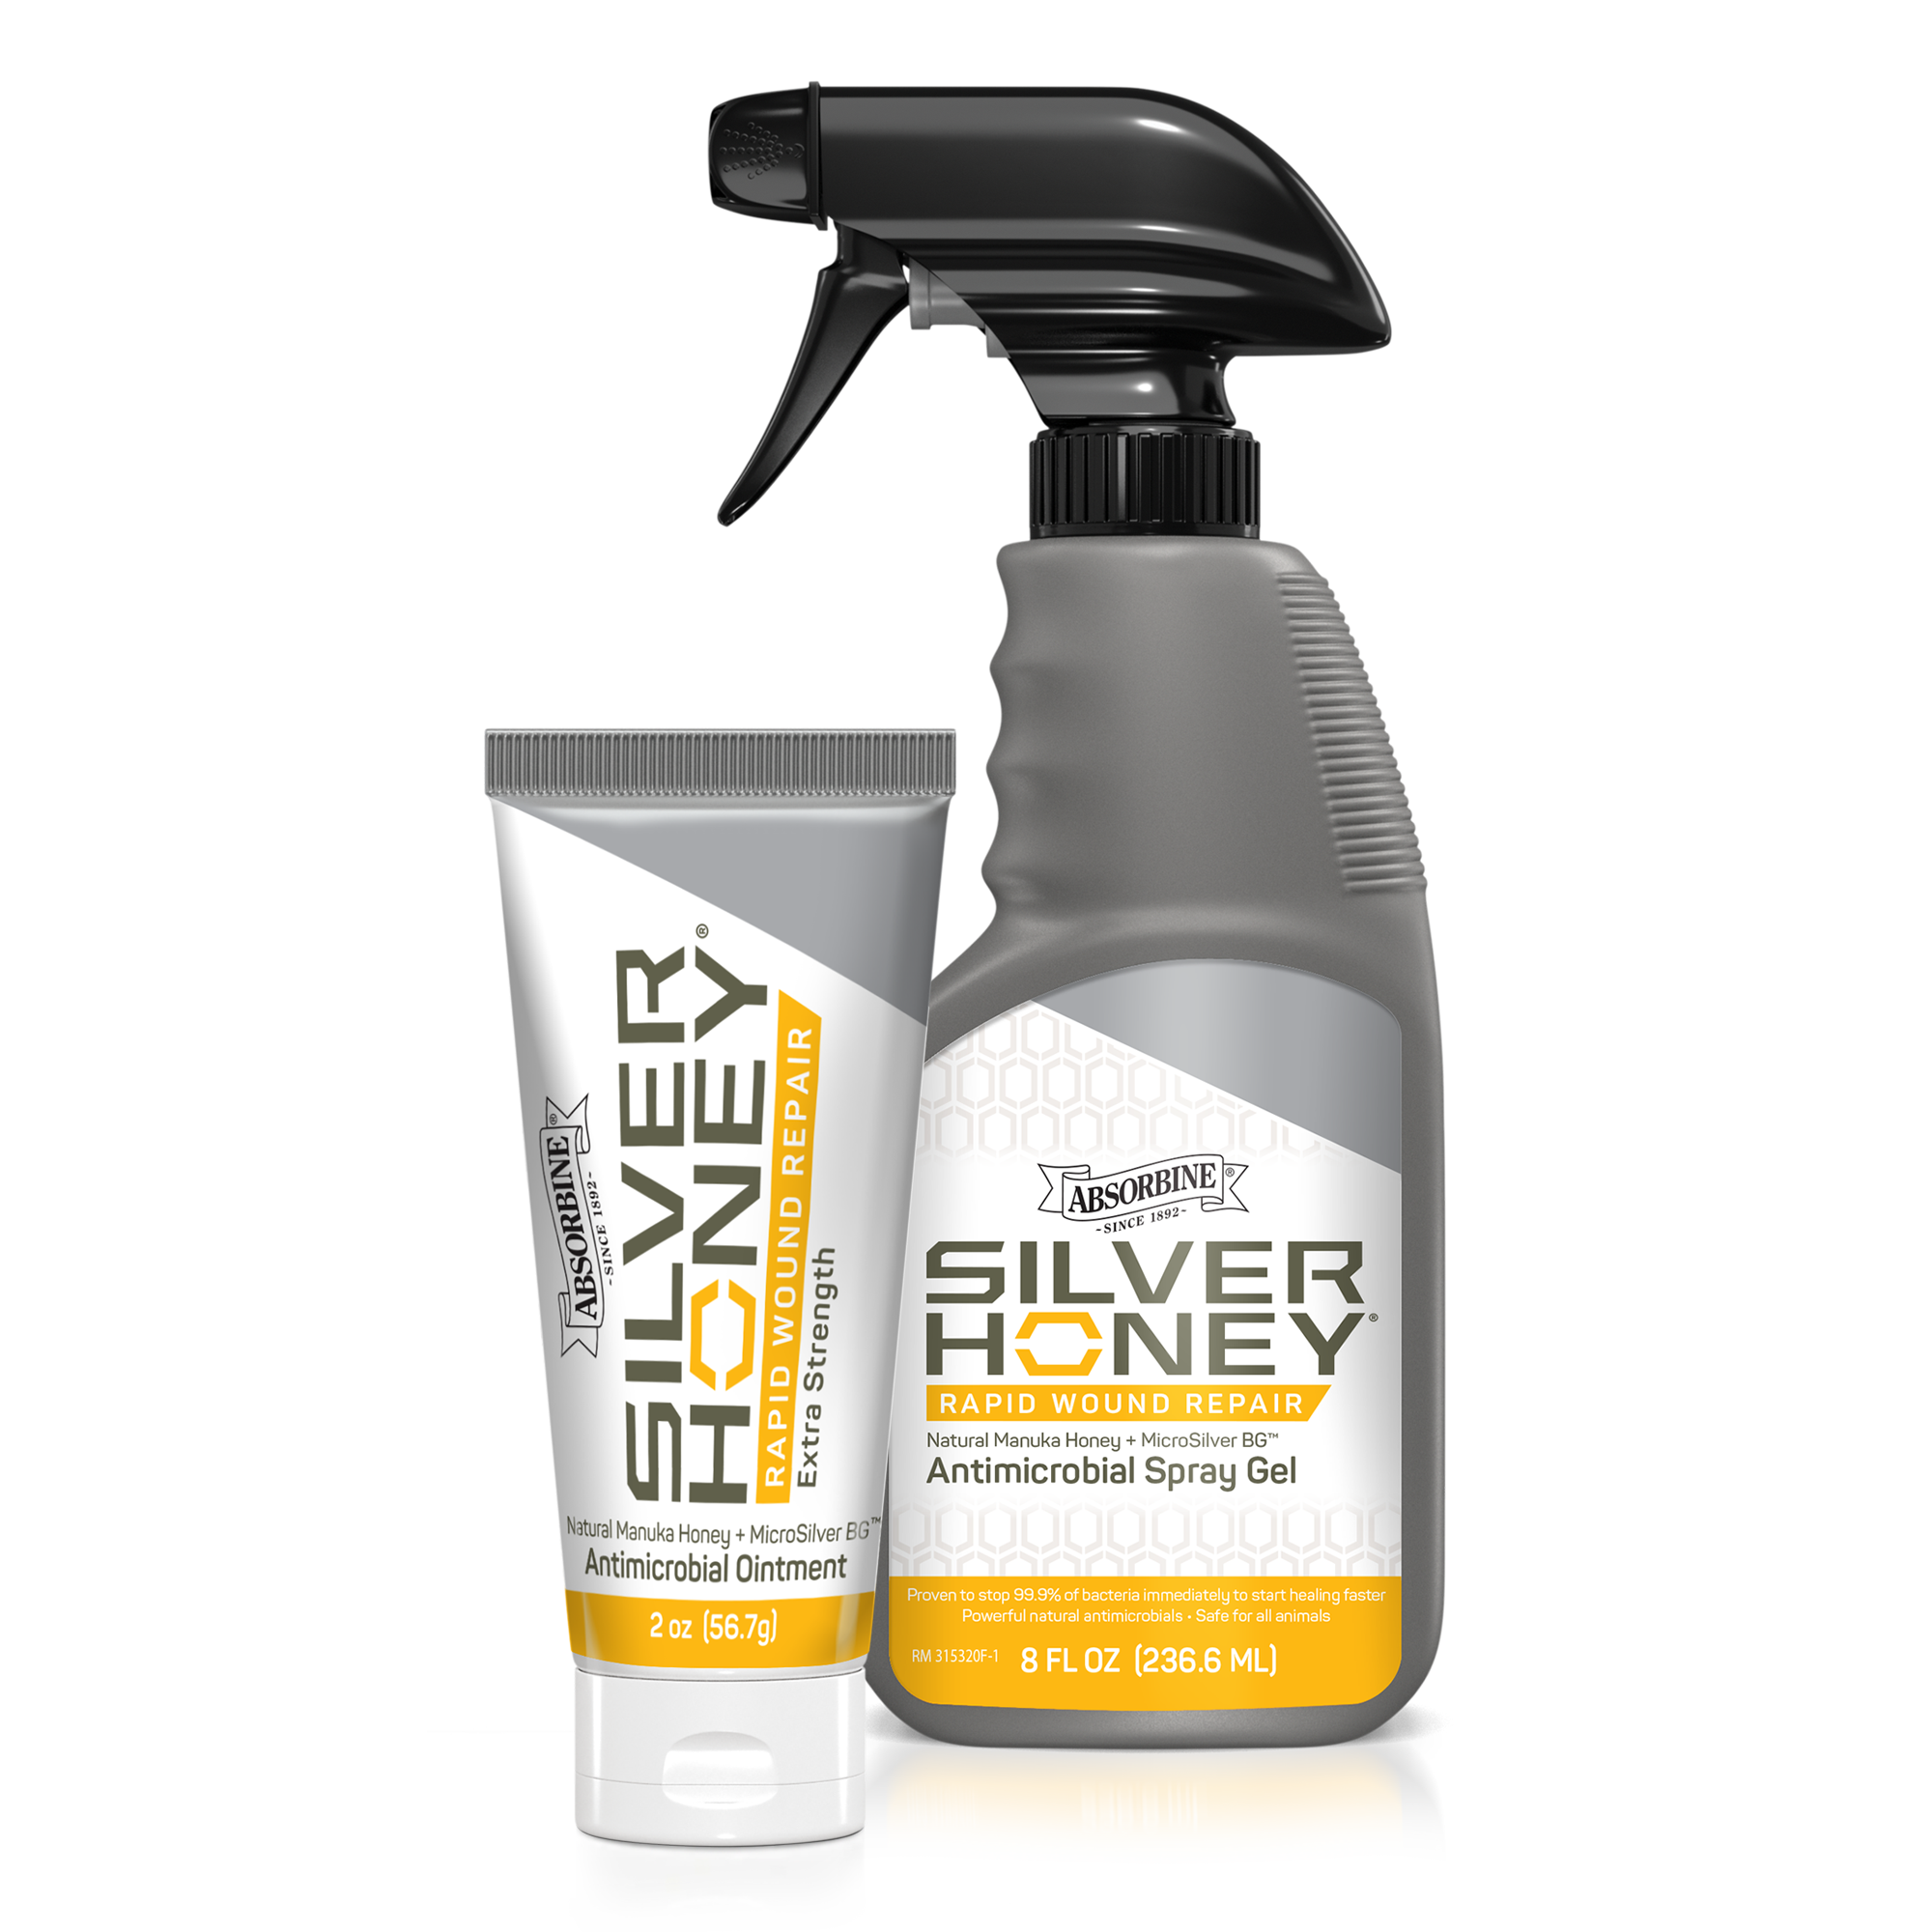 Silver Honey Rapid Wound Repair combo pack. Silver Honey extra strength 2 ounce ointment on the left. Silver Honey Rapid Wound repair Antimicrobial 8 ounce spray gel on the right.